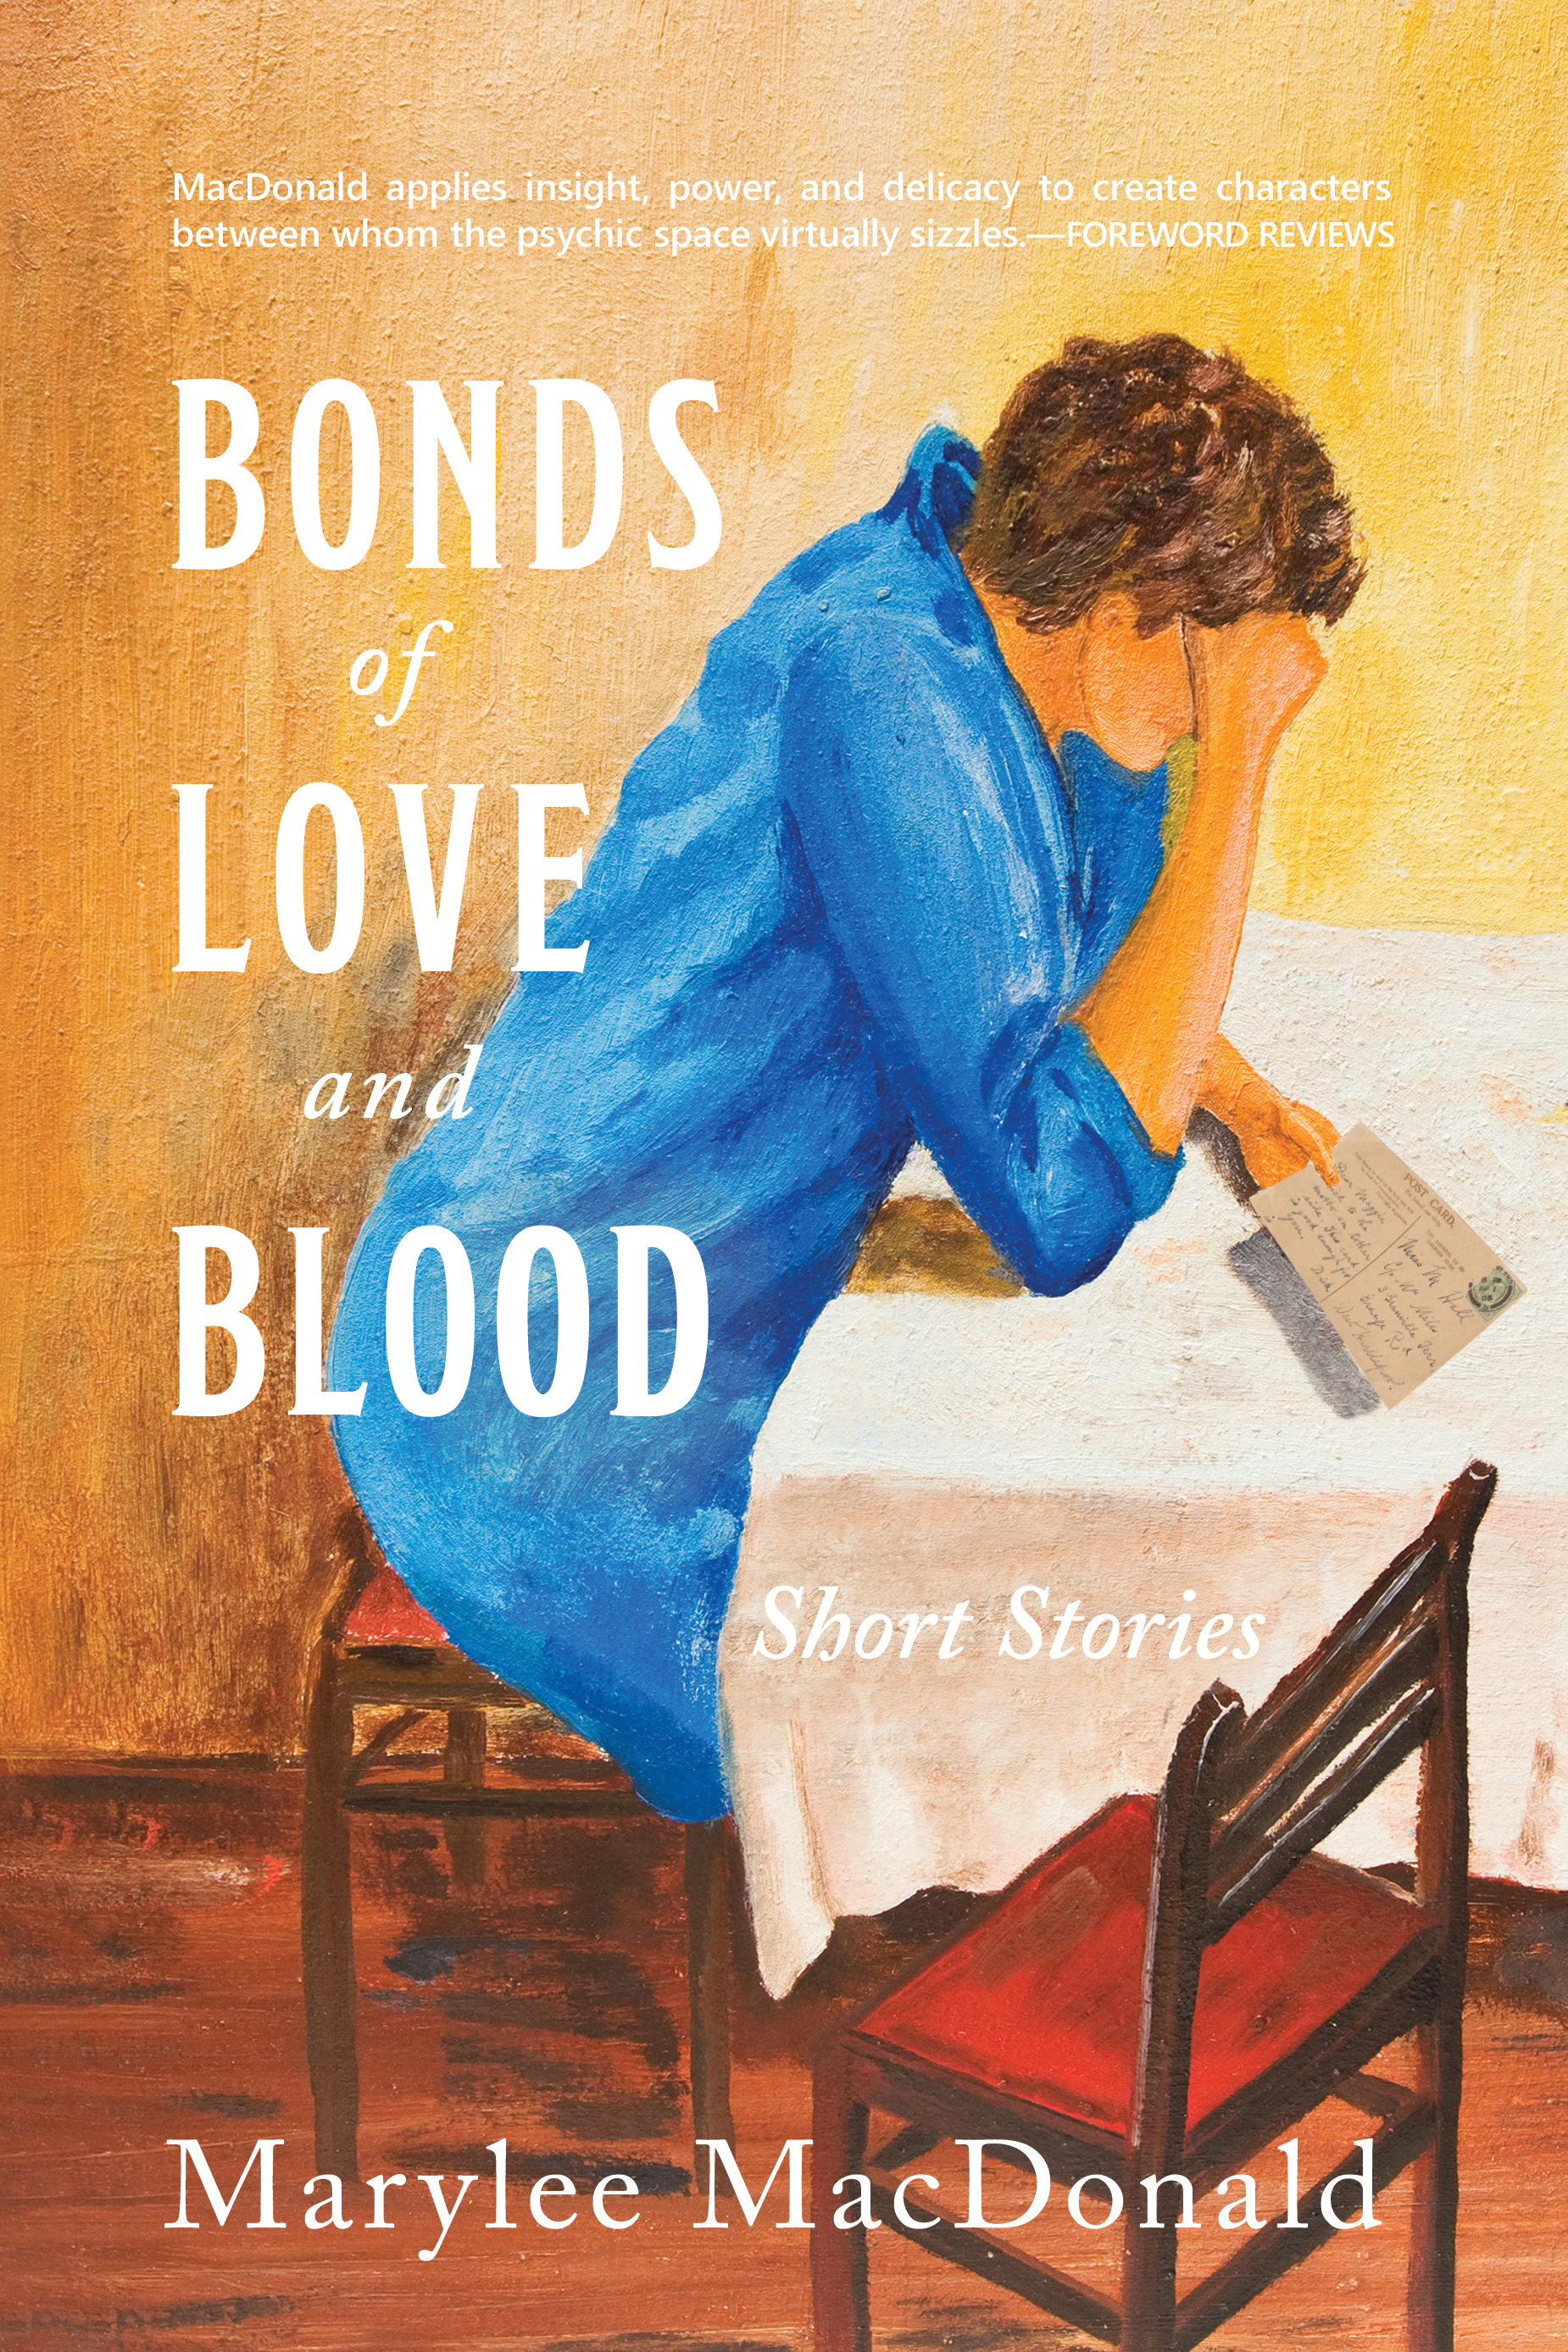 The cover of Bonds of Love and Blood by Marylee MacDonald. It's a picture of a traveler carrying a suitcase.